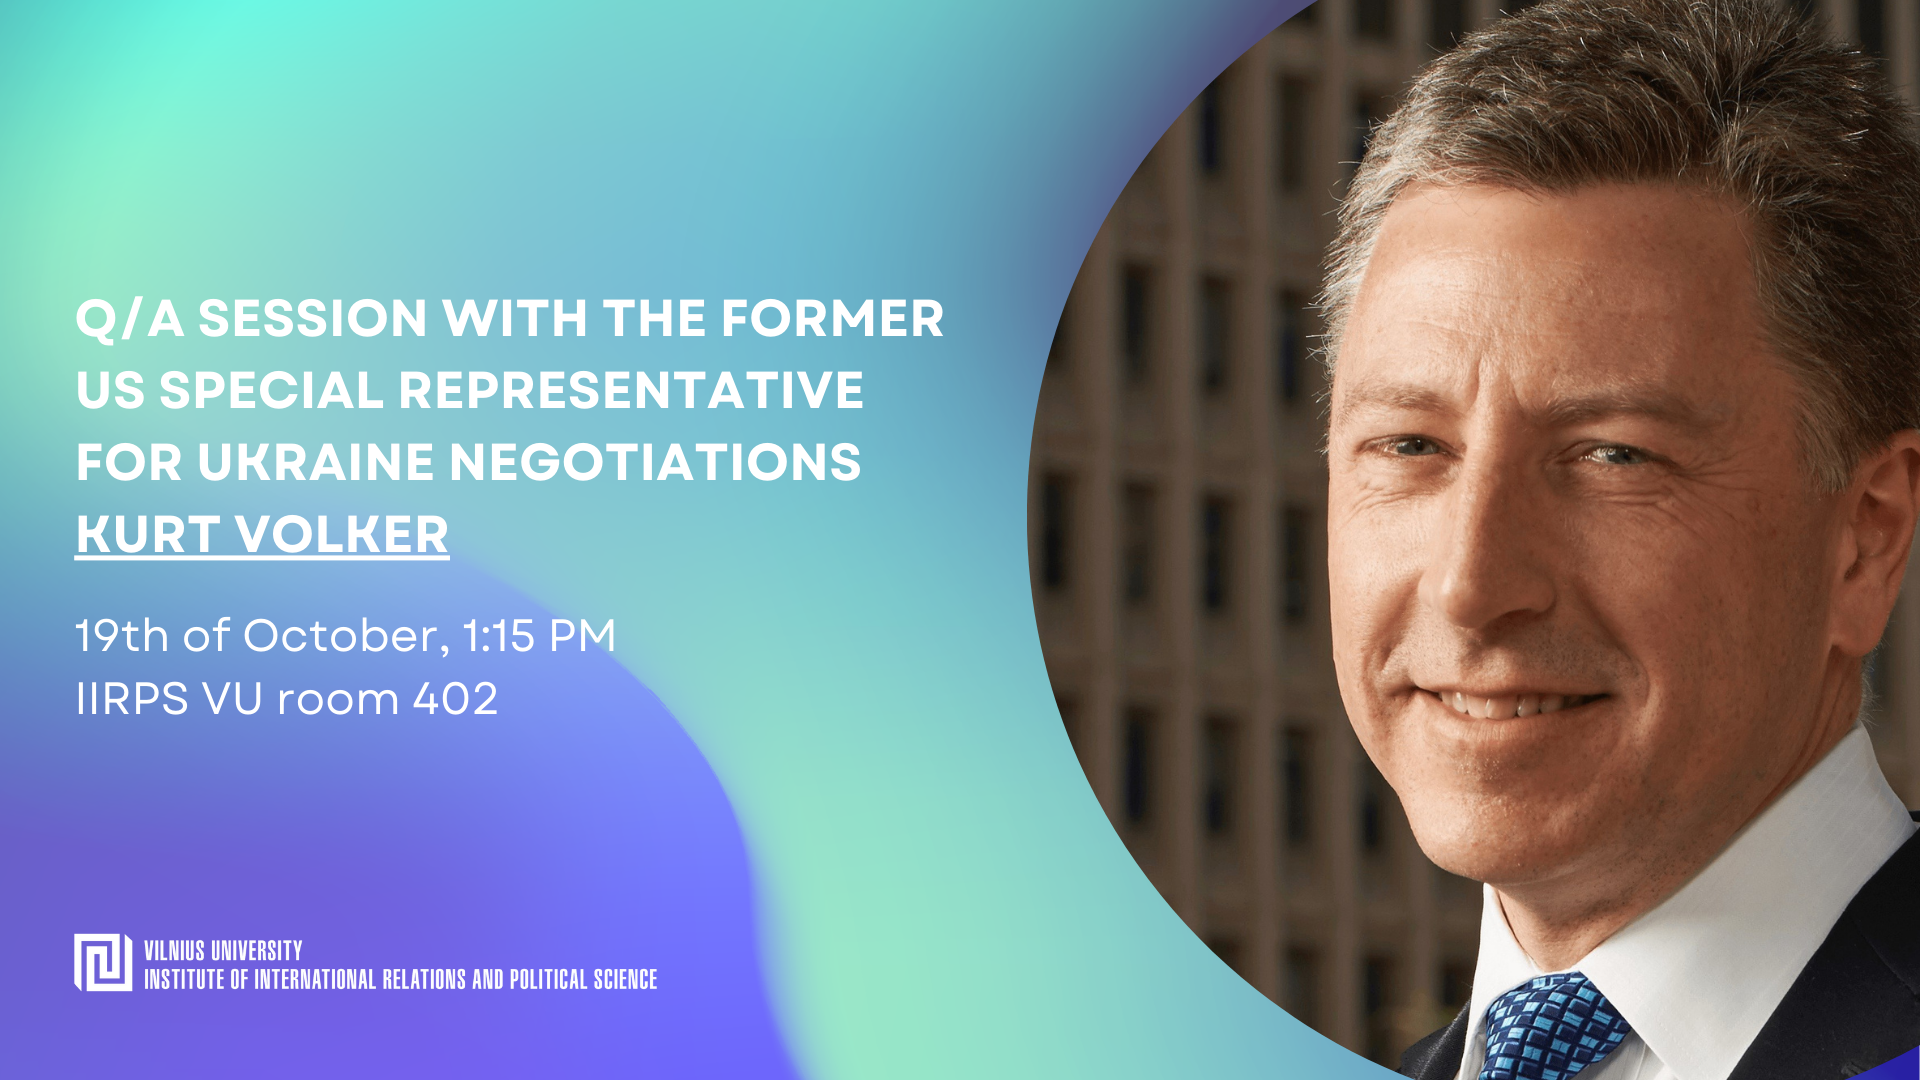 Q/A session with the former US Special Representative for Ukraine Negotiations Kurt Volker